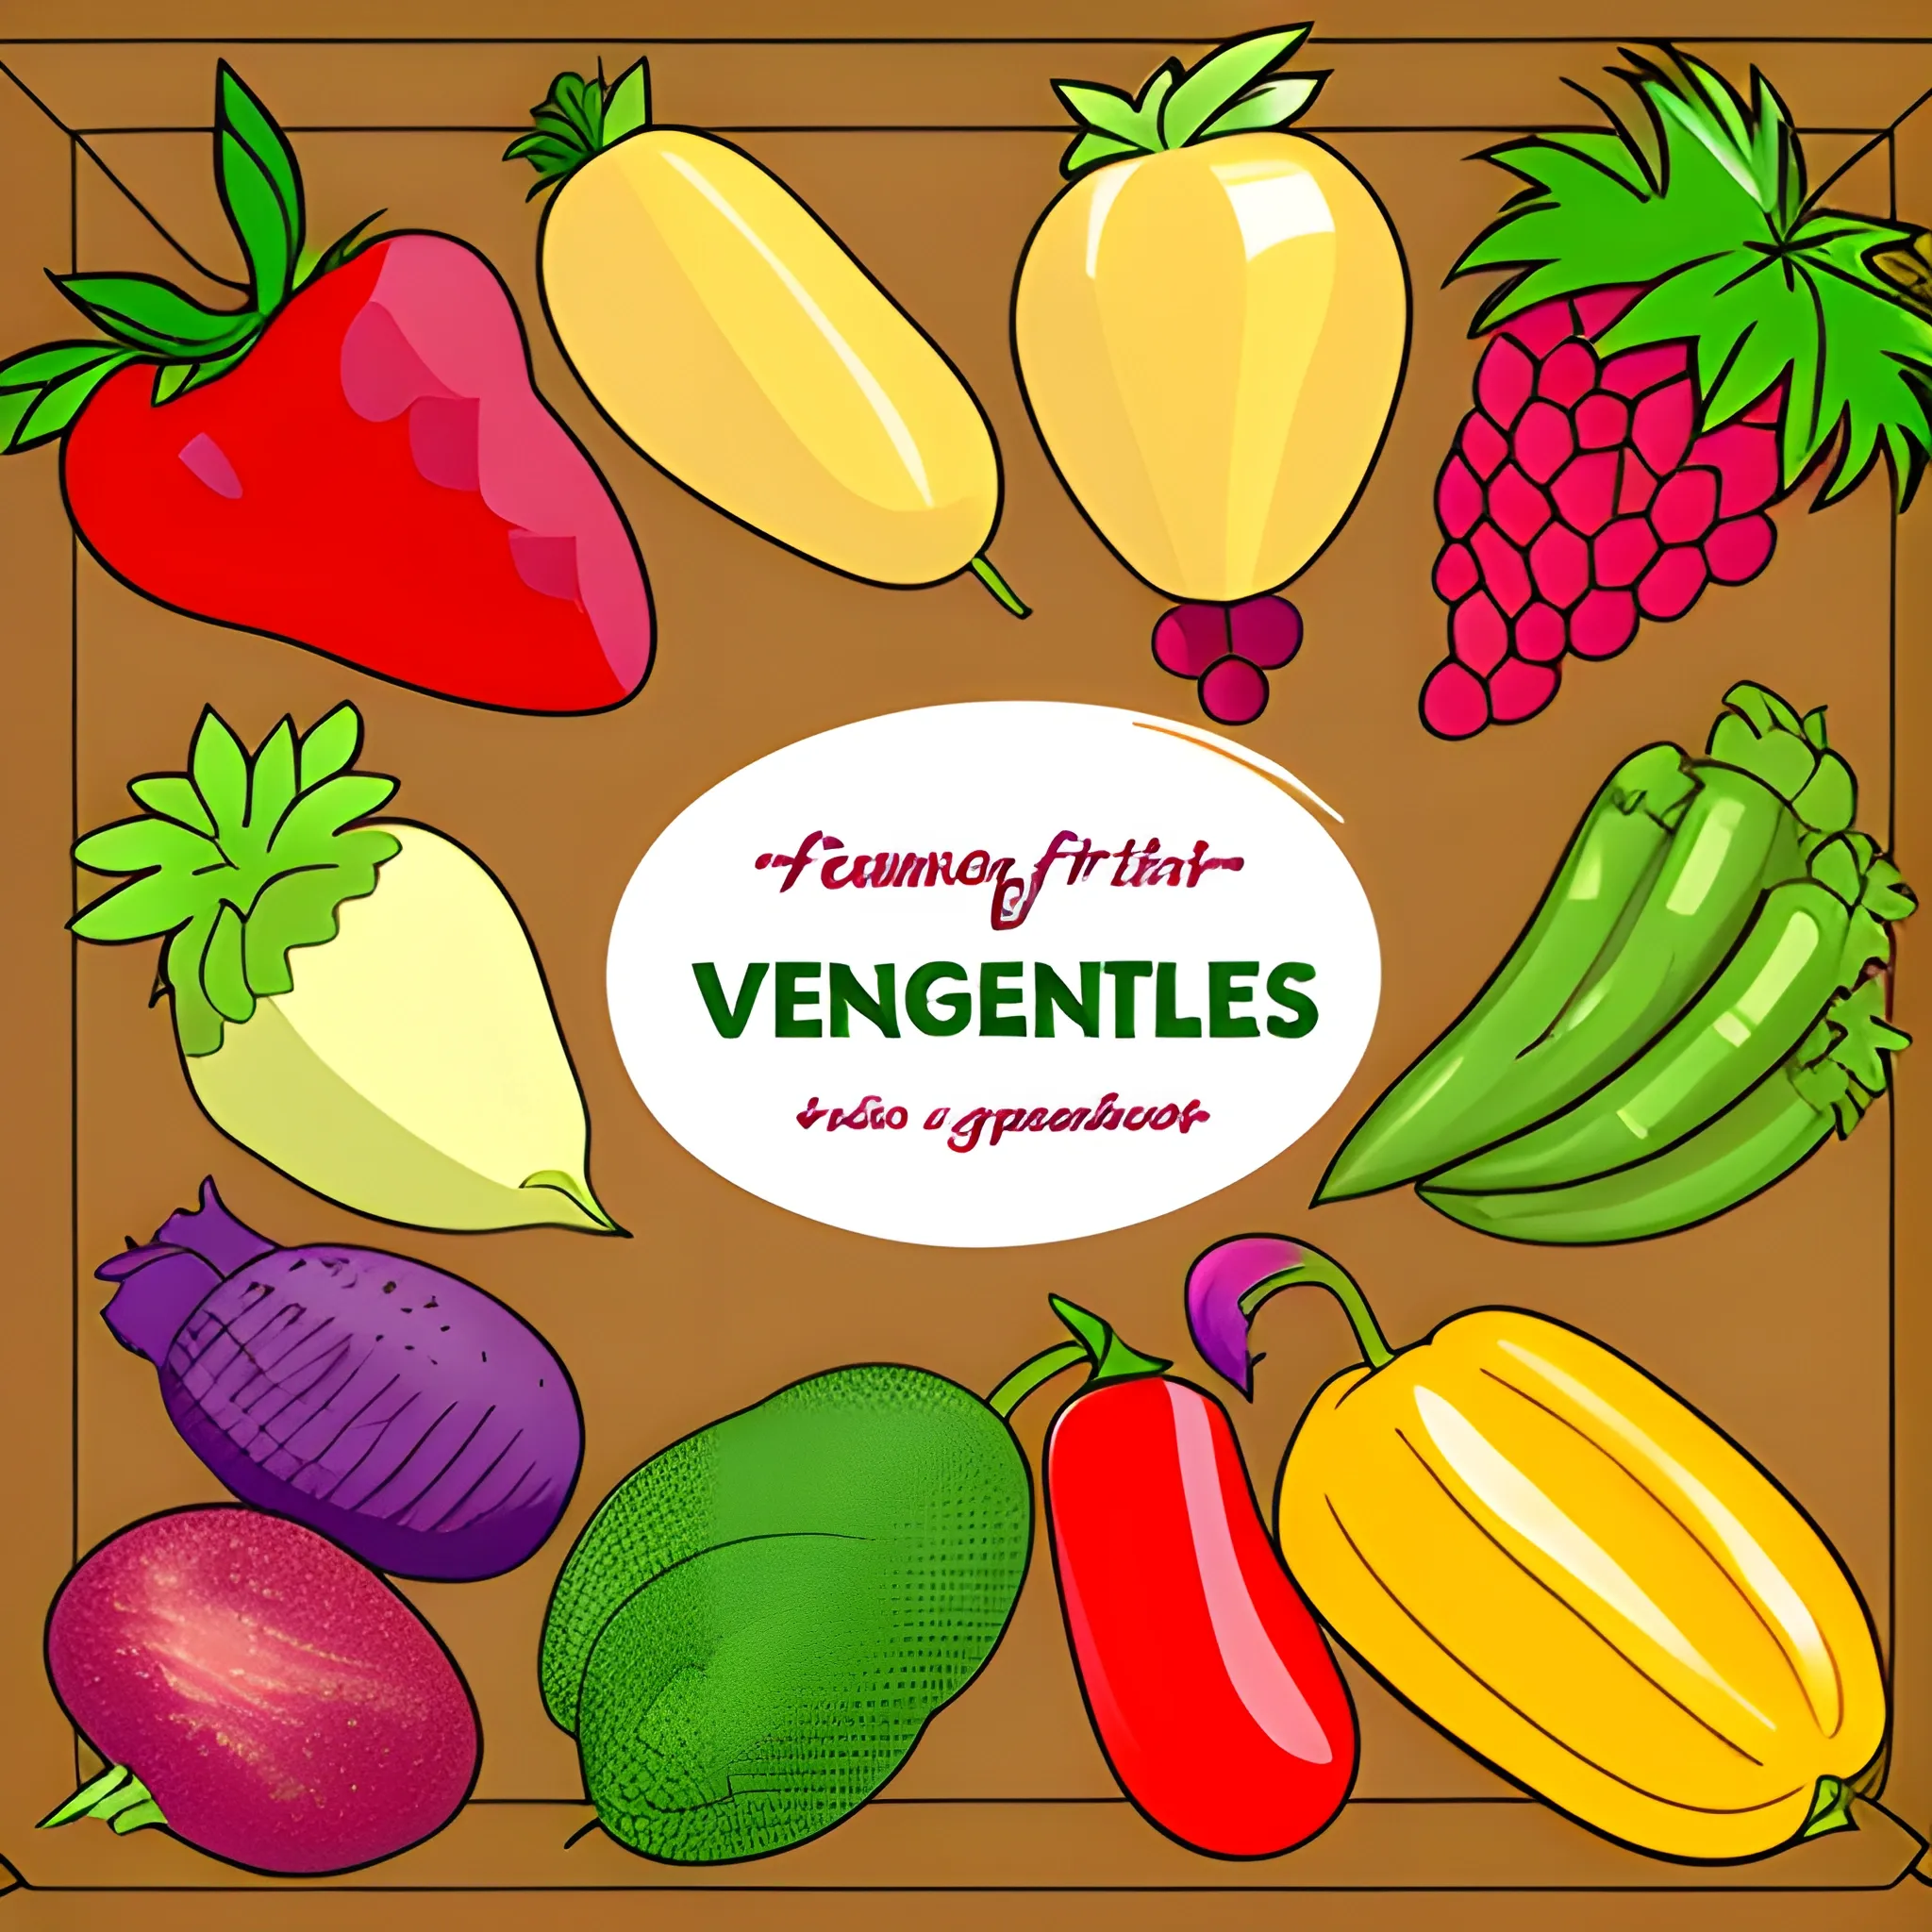 Assortment of fresh ripe fruits and vegetables on the table
, , Cartoon